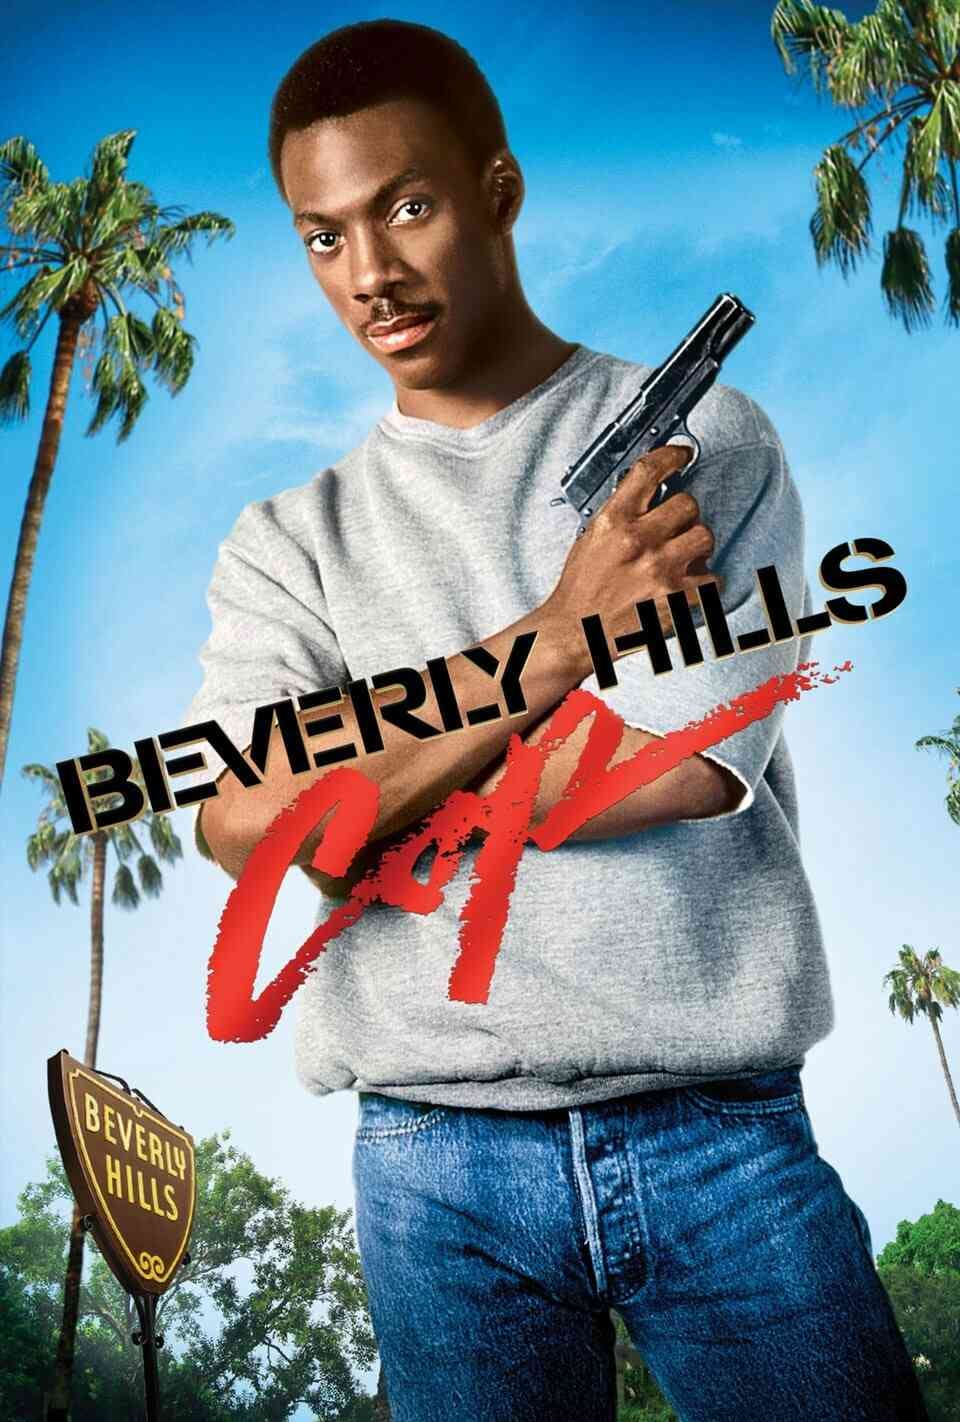 Read Beverly Hills Cop screenplay (poster)